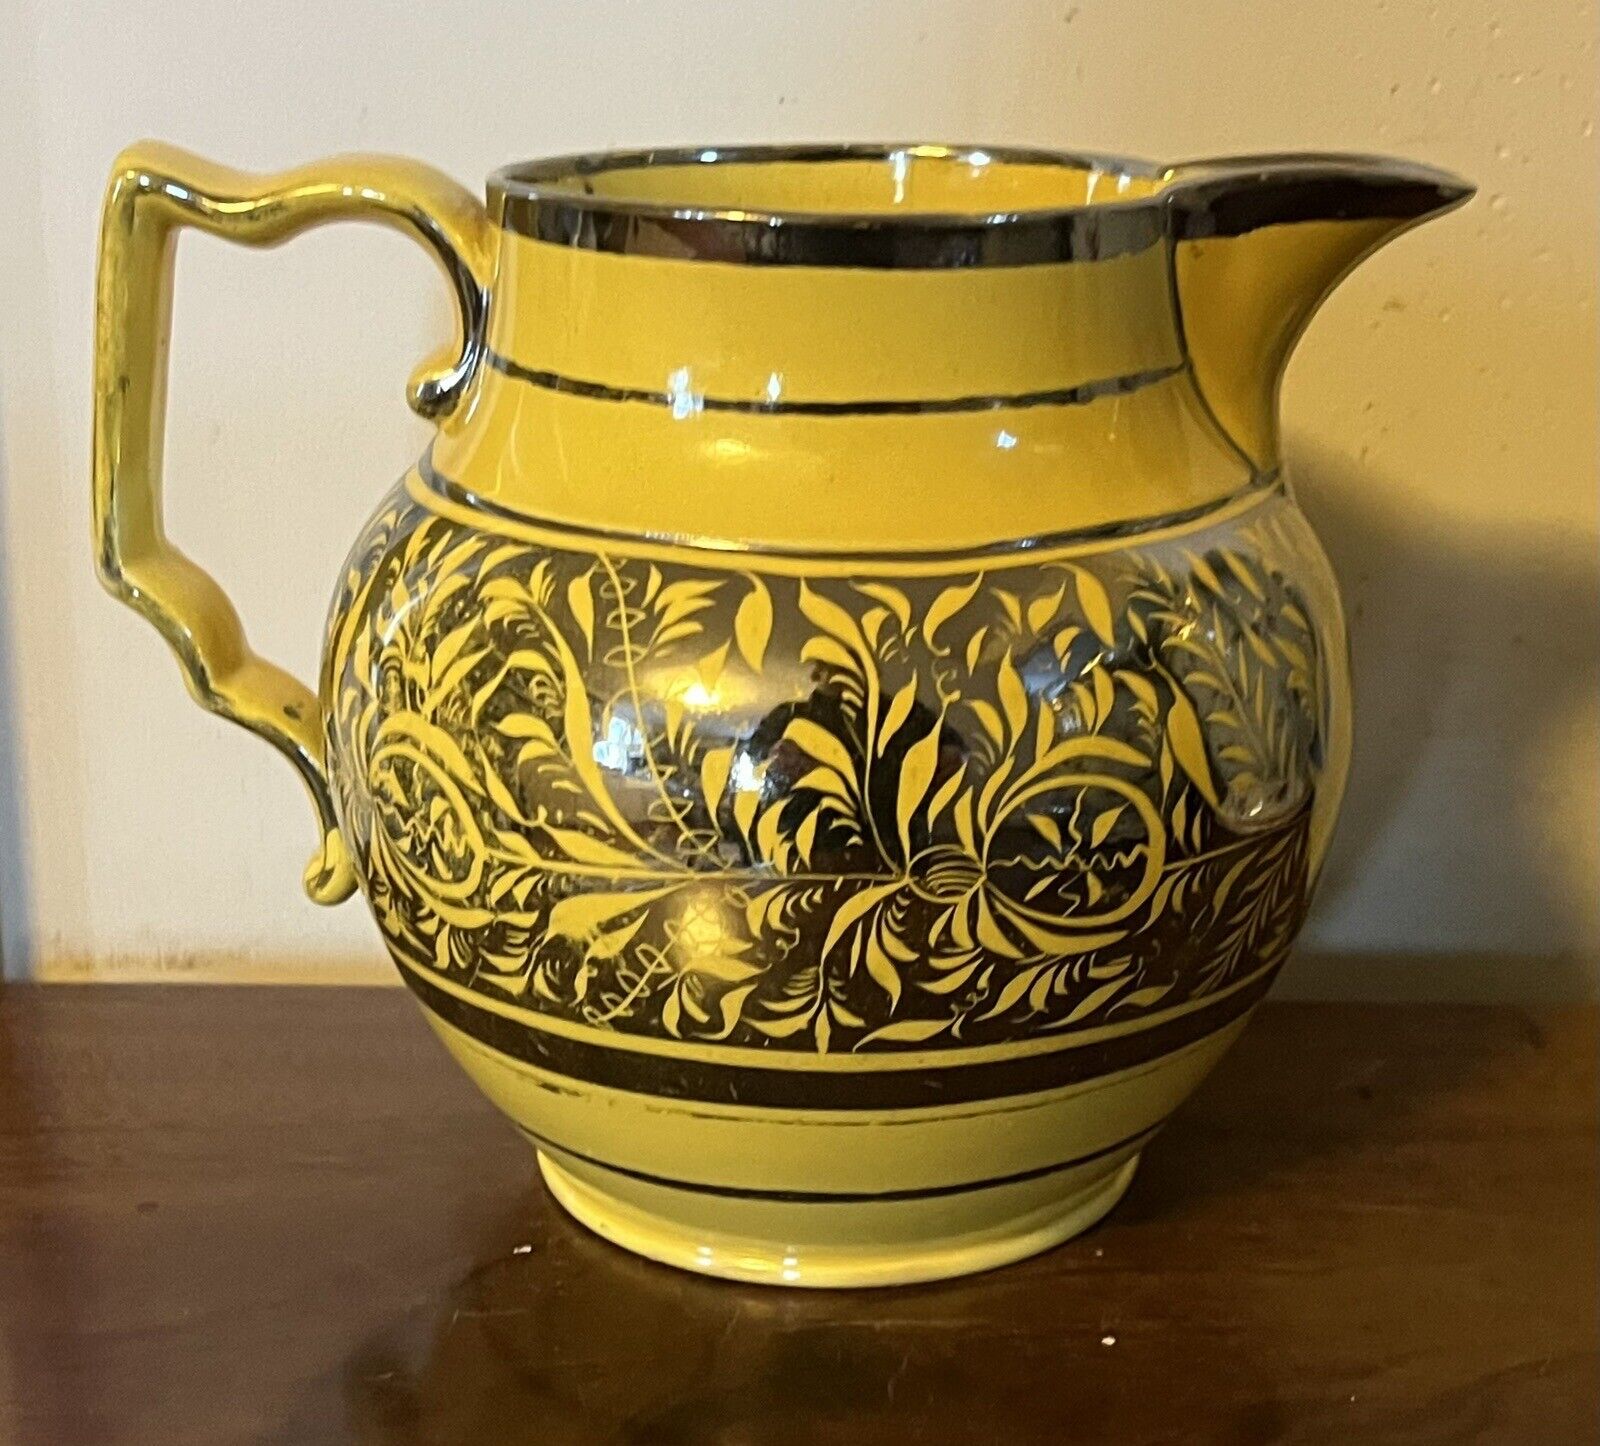 Antique 19th c English Regency Staffordshire Silver Luster Canary Yellow Pitcher